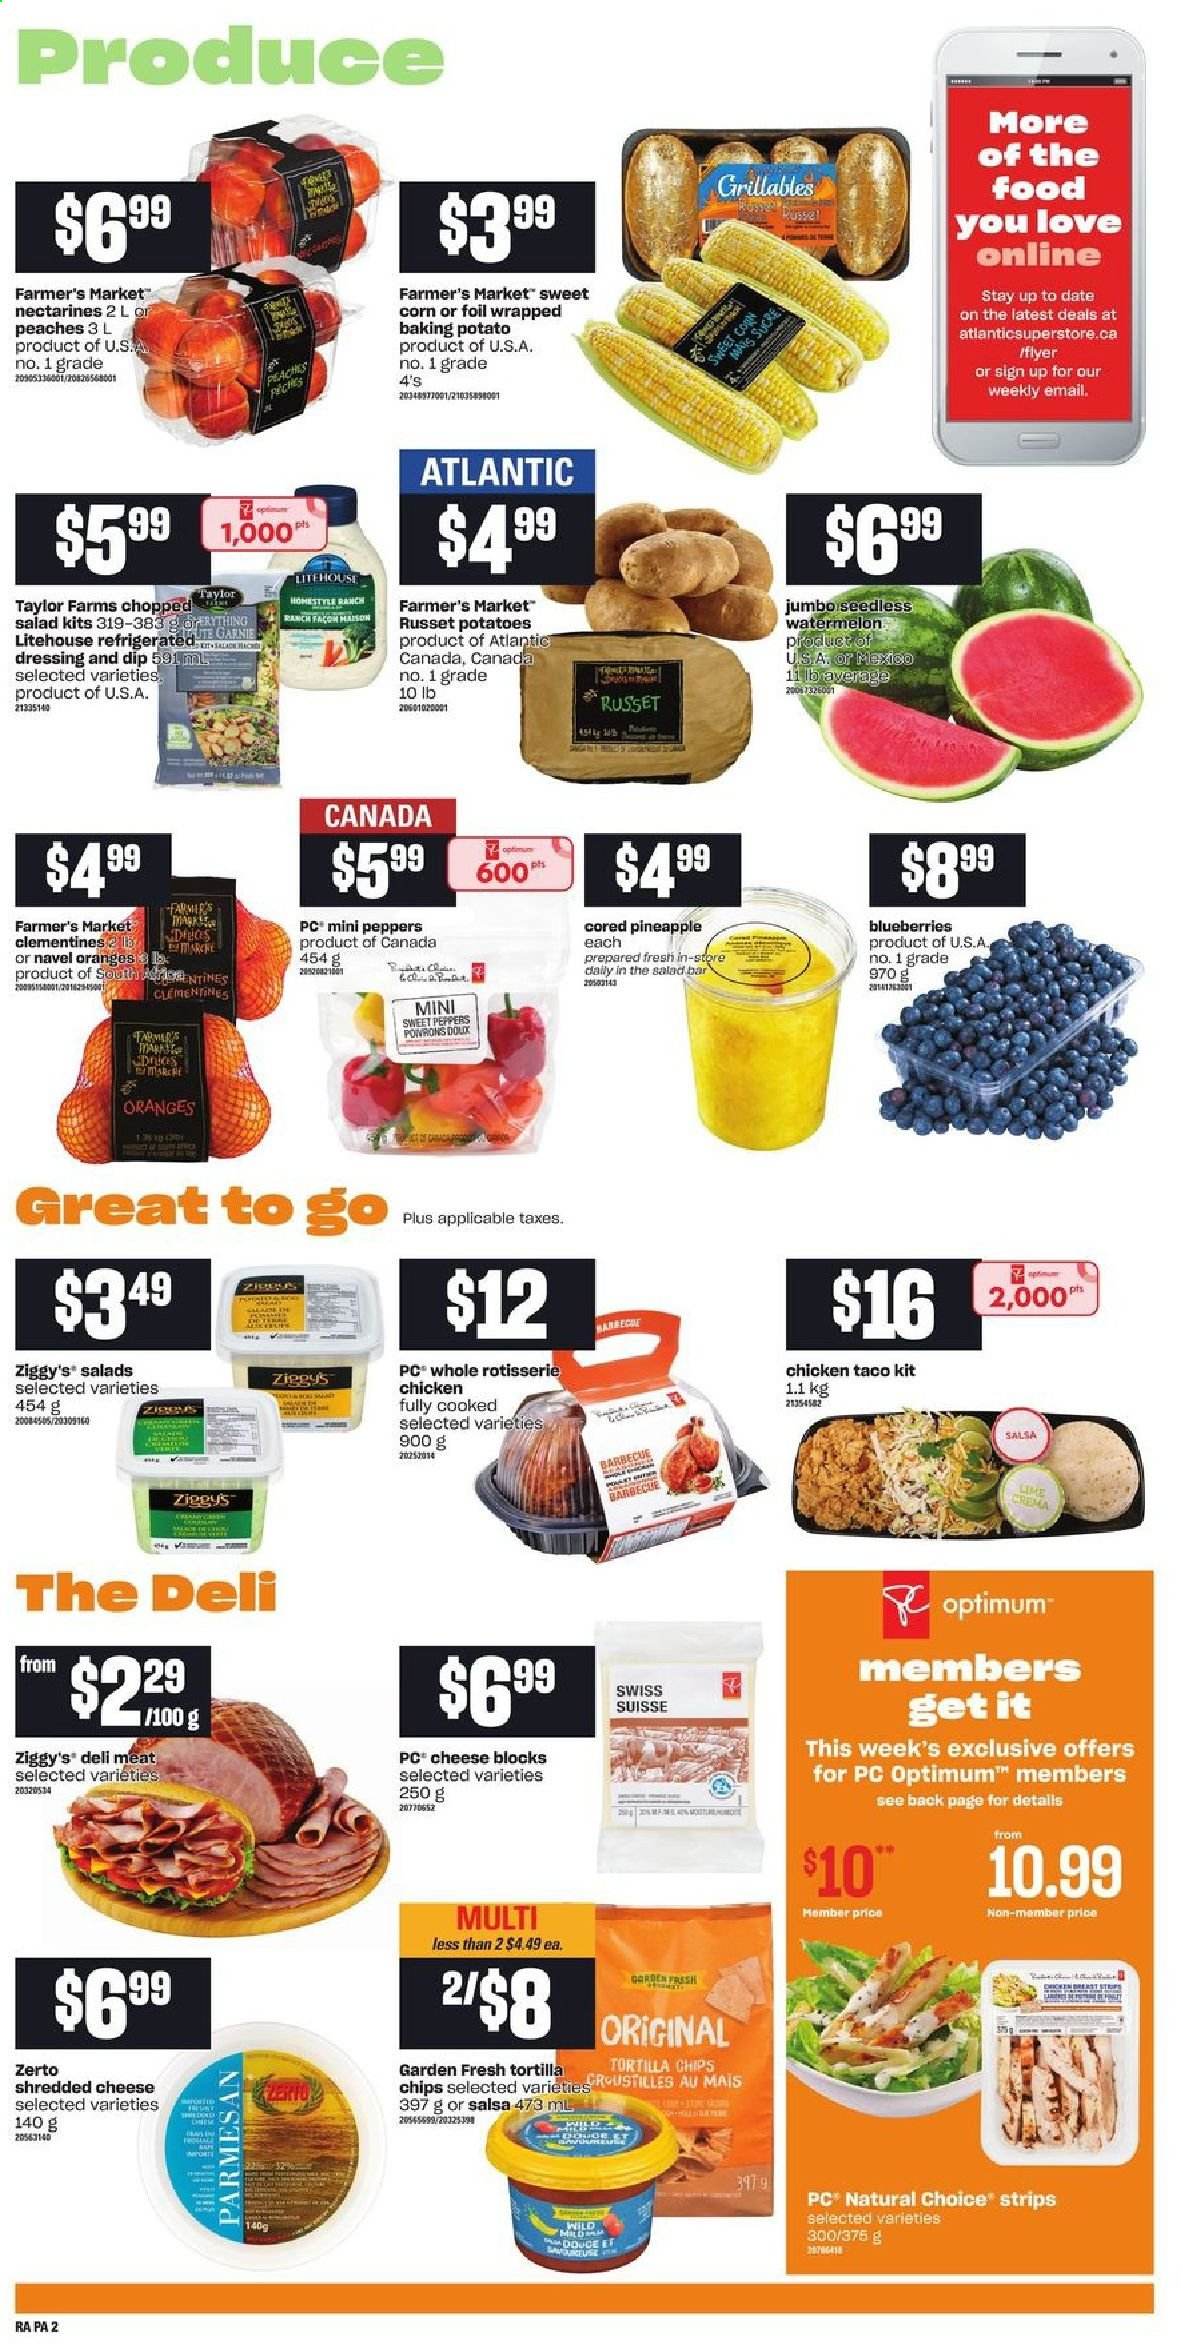 thumbnail - Atlantic Superstore Flyer - June 30, 2021 - July 07, 2021 - Sales products - corn, russet potatoes, potatoes, salad, peppers, chopped salad, blueberries, clementines, nectarines, watermelon, pineapple, peaches, navel oranges, chicken roast, shredded cheese, parmesan, dip, strips, tortilla chips, dressing, salsa, Sure, Optimum, chips. Page 3.